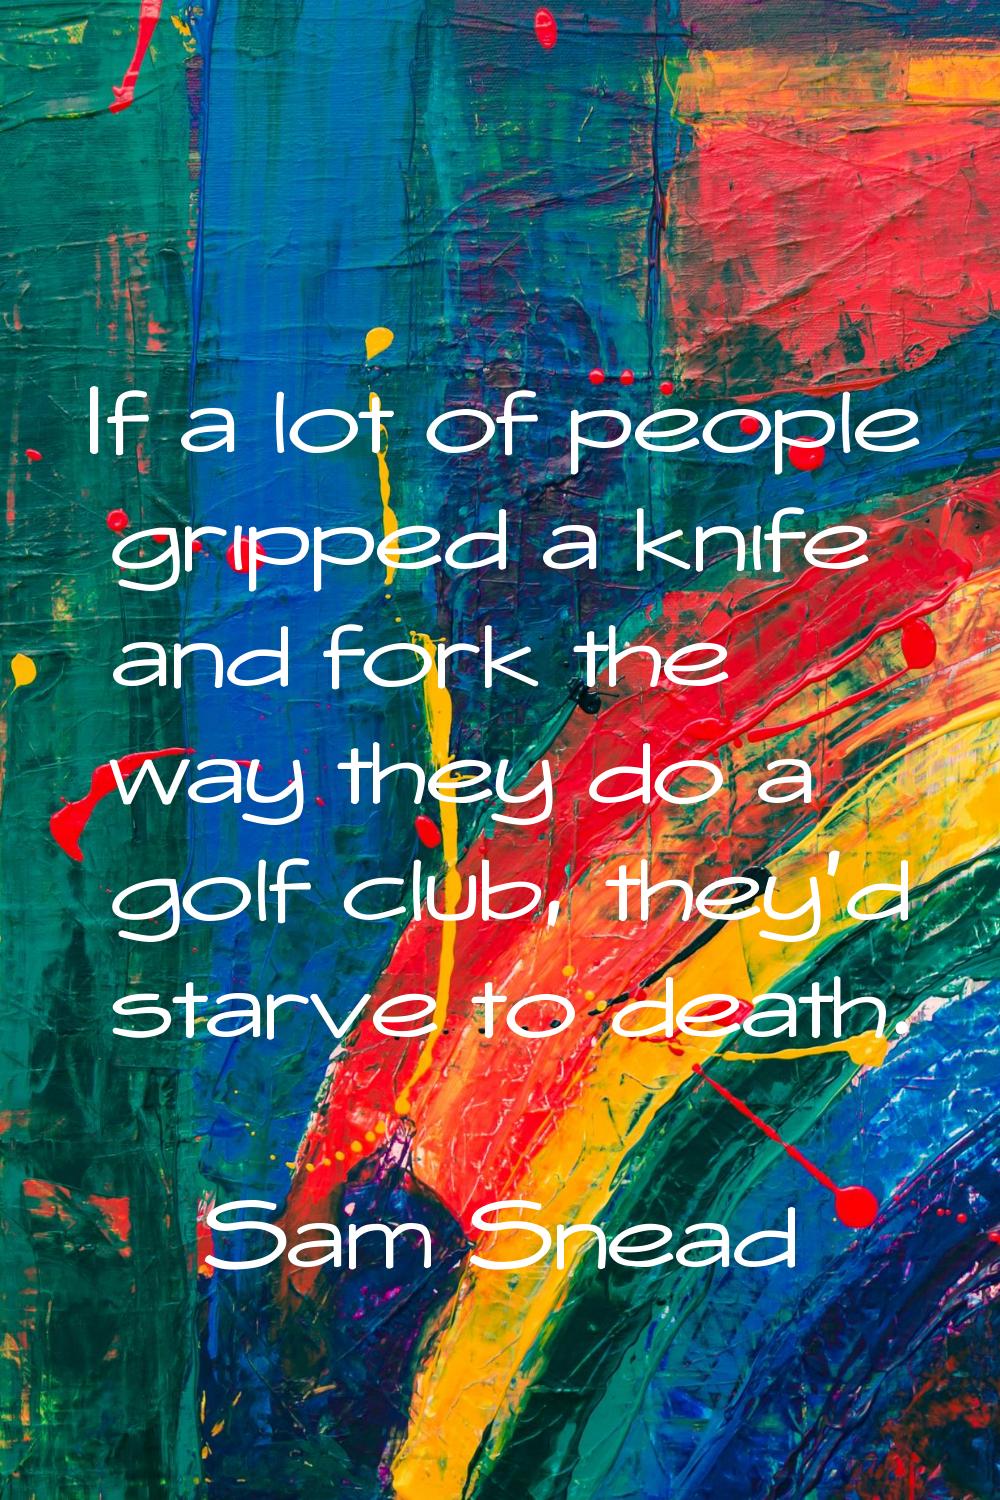 If a lot of people gripped a knife and fork the way they do a golf club, they'd starve to death.